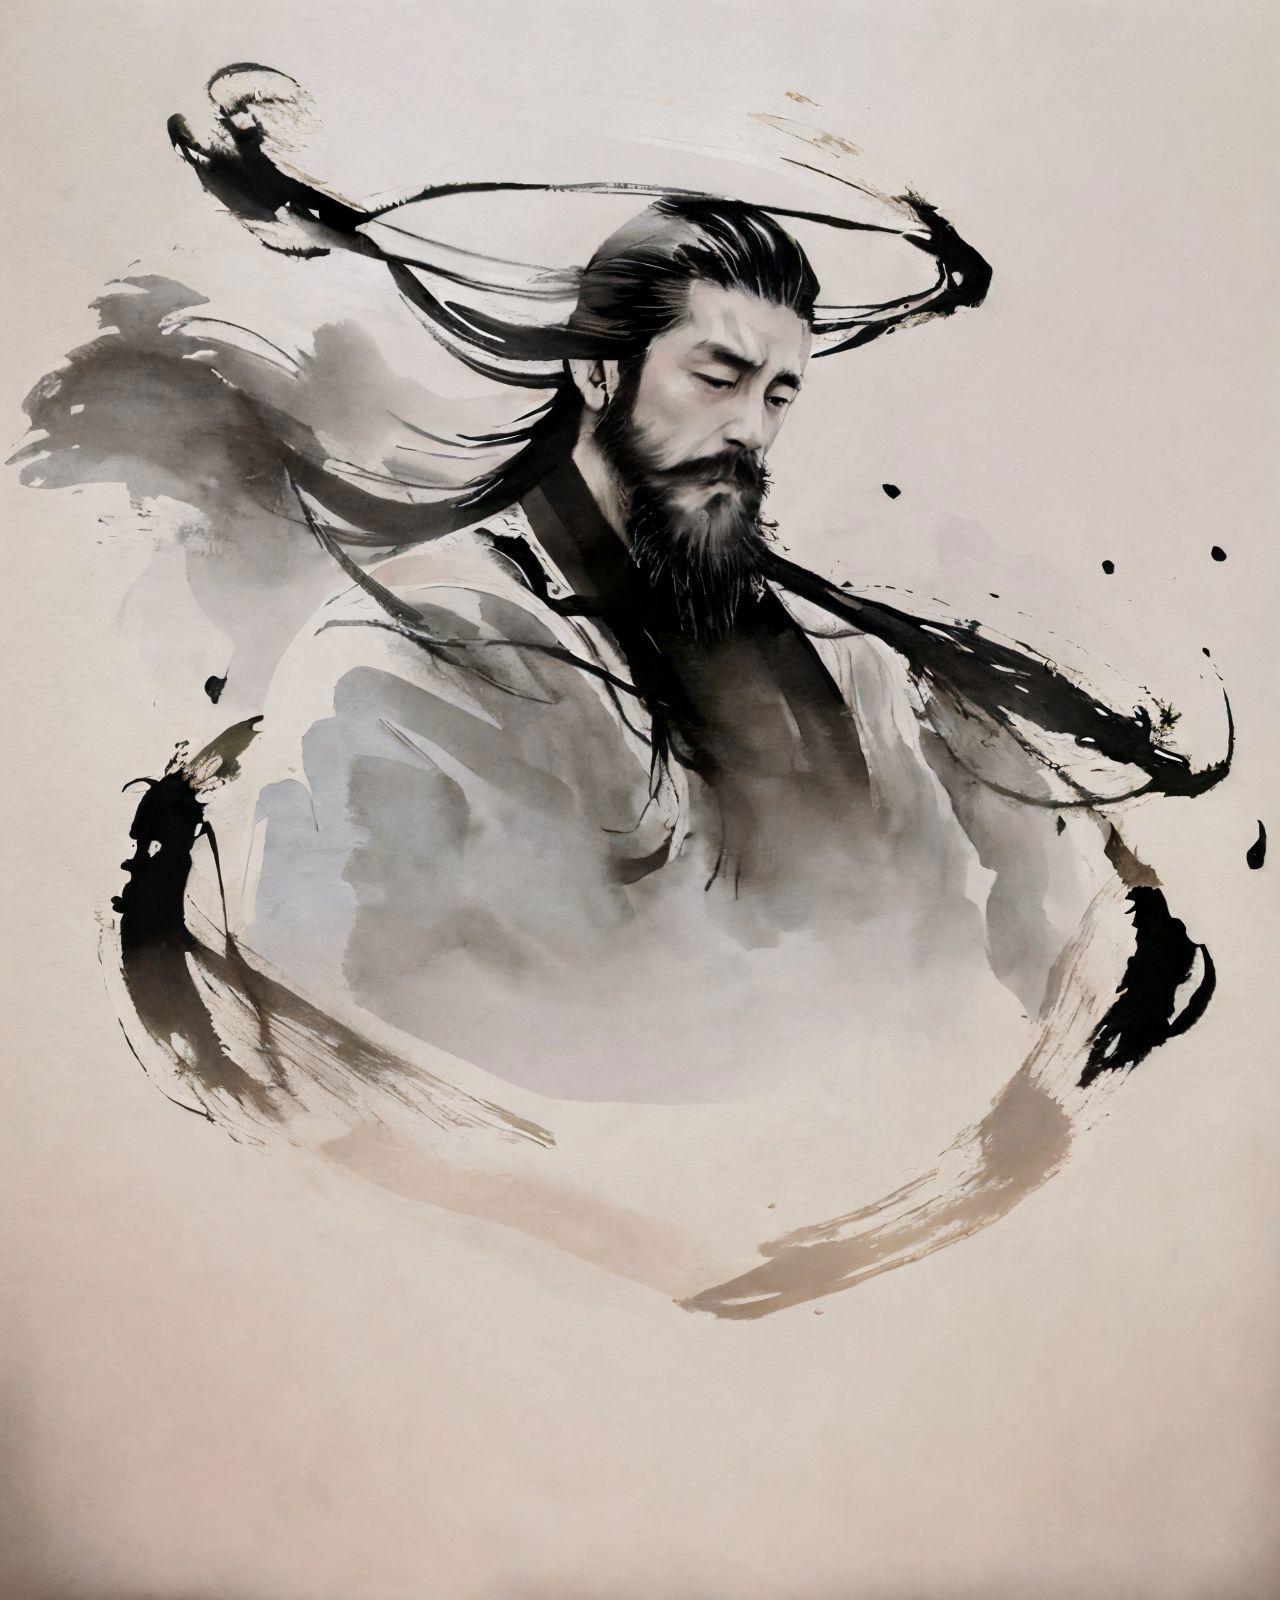 A man with a beard and long hair, wearing a black shirt, is depicted in a painting.